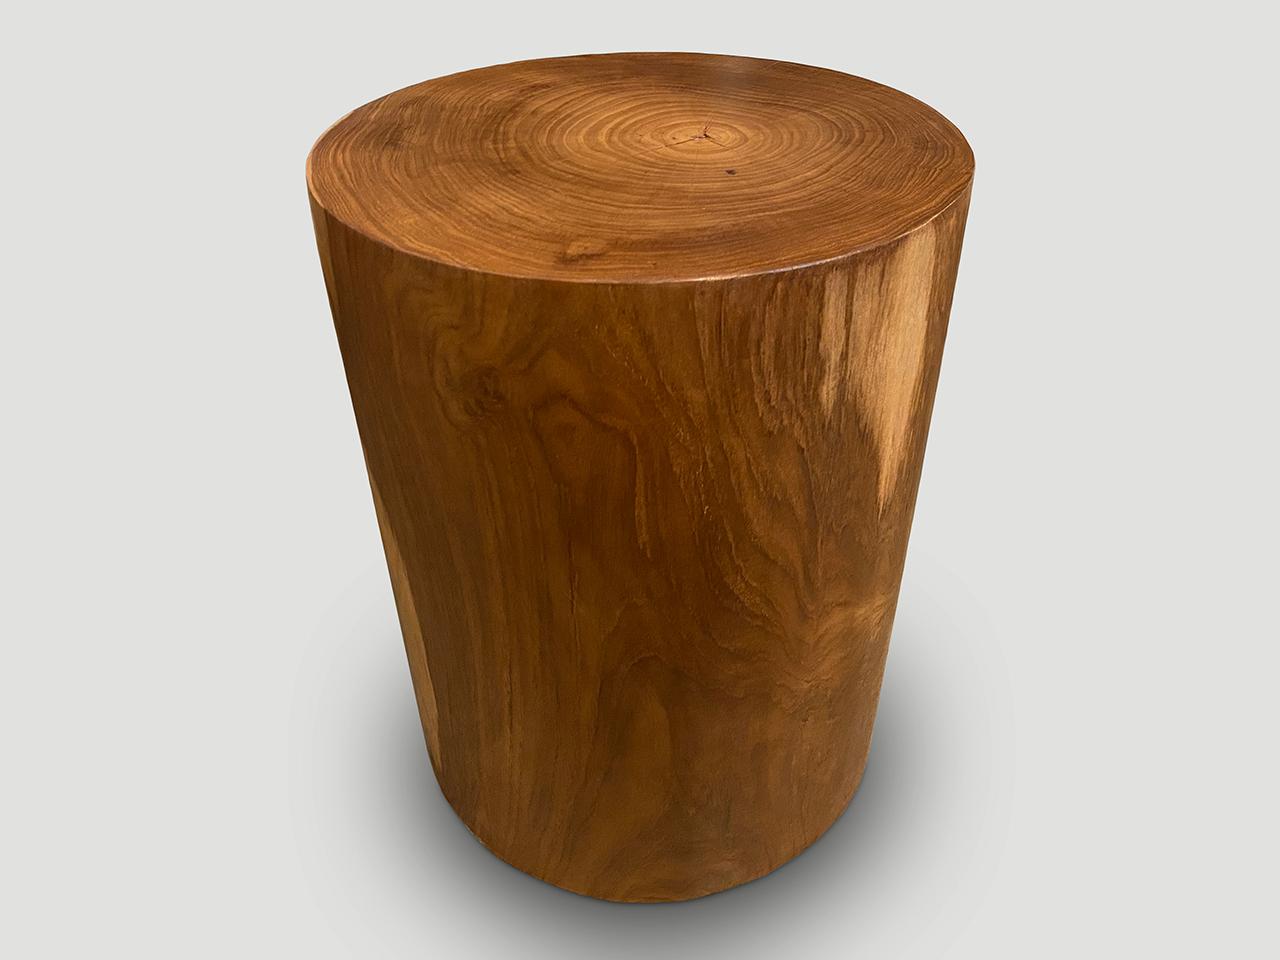 Exquisite rosewood side table with stunning contrasting tones. Finished with a natural oil revealing the beautiful wood grain. We have a collection. The price and images reflect the one shown.

Own an Andrianna Shamaris original.

Andrianna